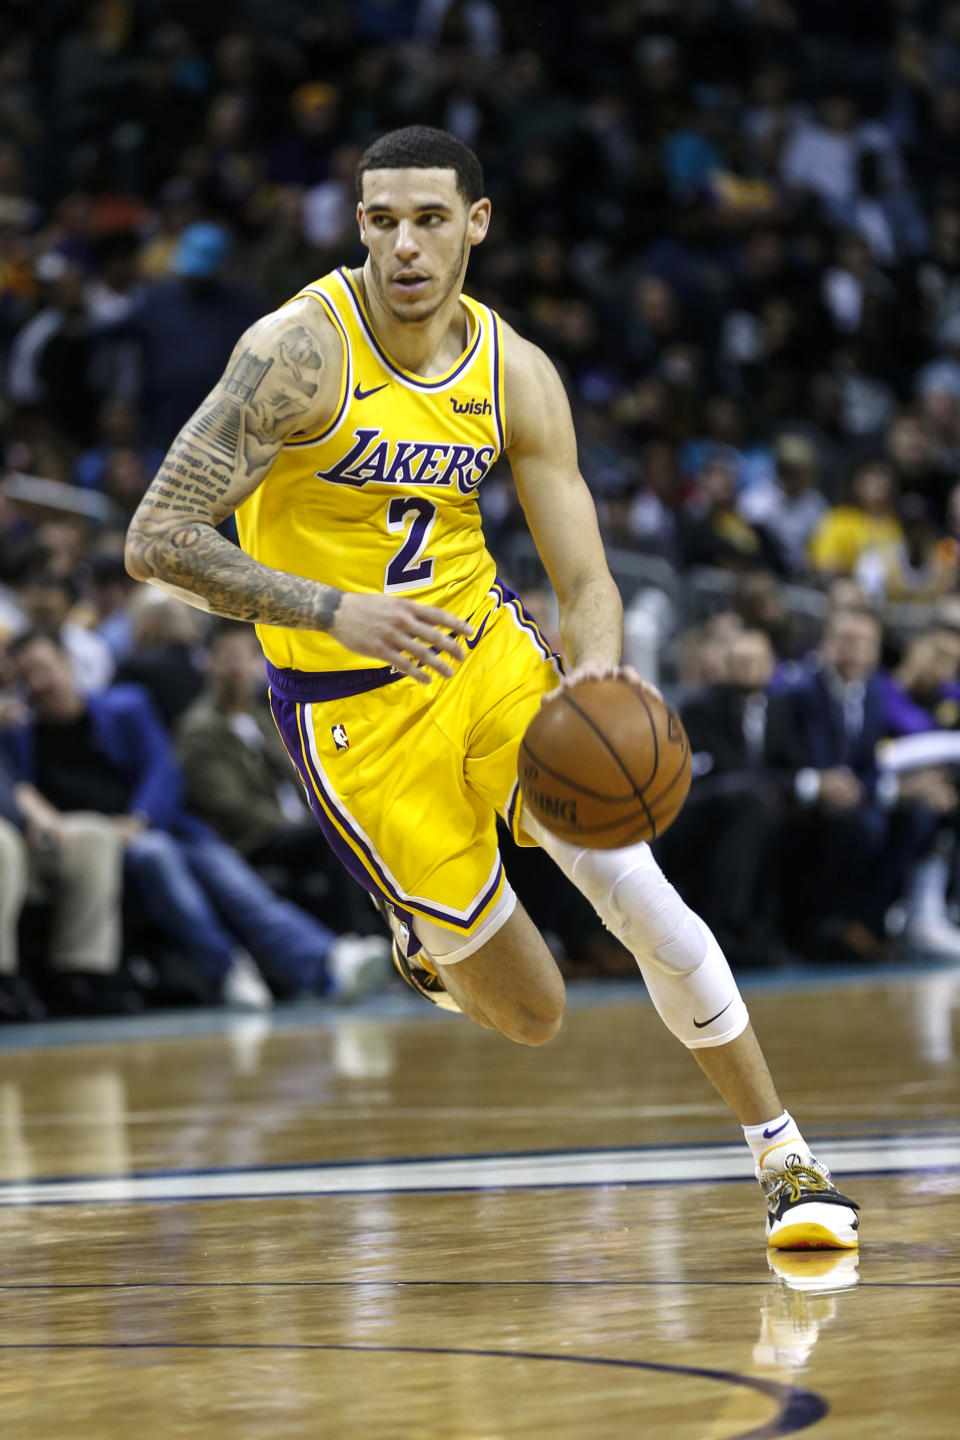 FILE - In this Dec. 15, 2018, file photo, Los Angeles Lakers guard Lonzo Ball runs the offense against the Charlotte Hornets during the second half of an NBA basketball game in Charlotte, N.C. Two people familiar with the situation say the New Orleans Pelicans have agreed to trade six-time All-Star Anthony Davis to the Lakers for Ball, forward Brandon Ingram, shooting guard Josh Hart and three first-round draft choices. The people spoke to The Associated Press on condition of anonymity because the trade cannot become official until the new league year begins July 6. ESPN first reported the trade.(AP Photo/Nell Redmond, File)